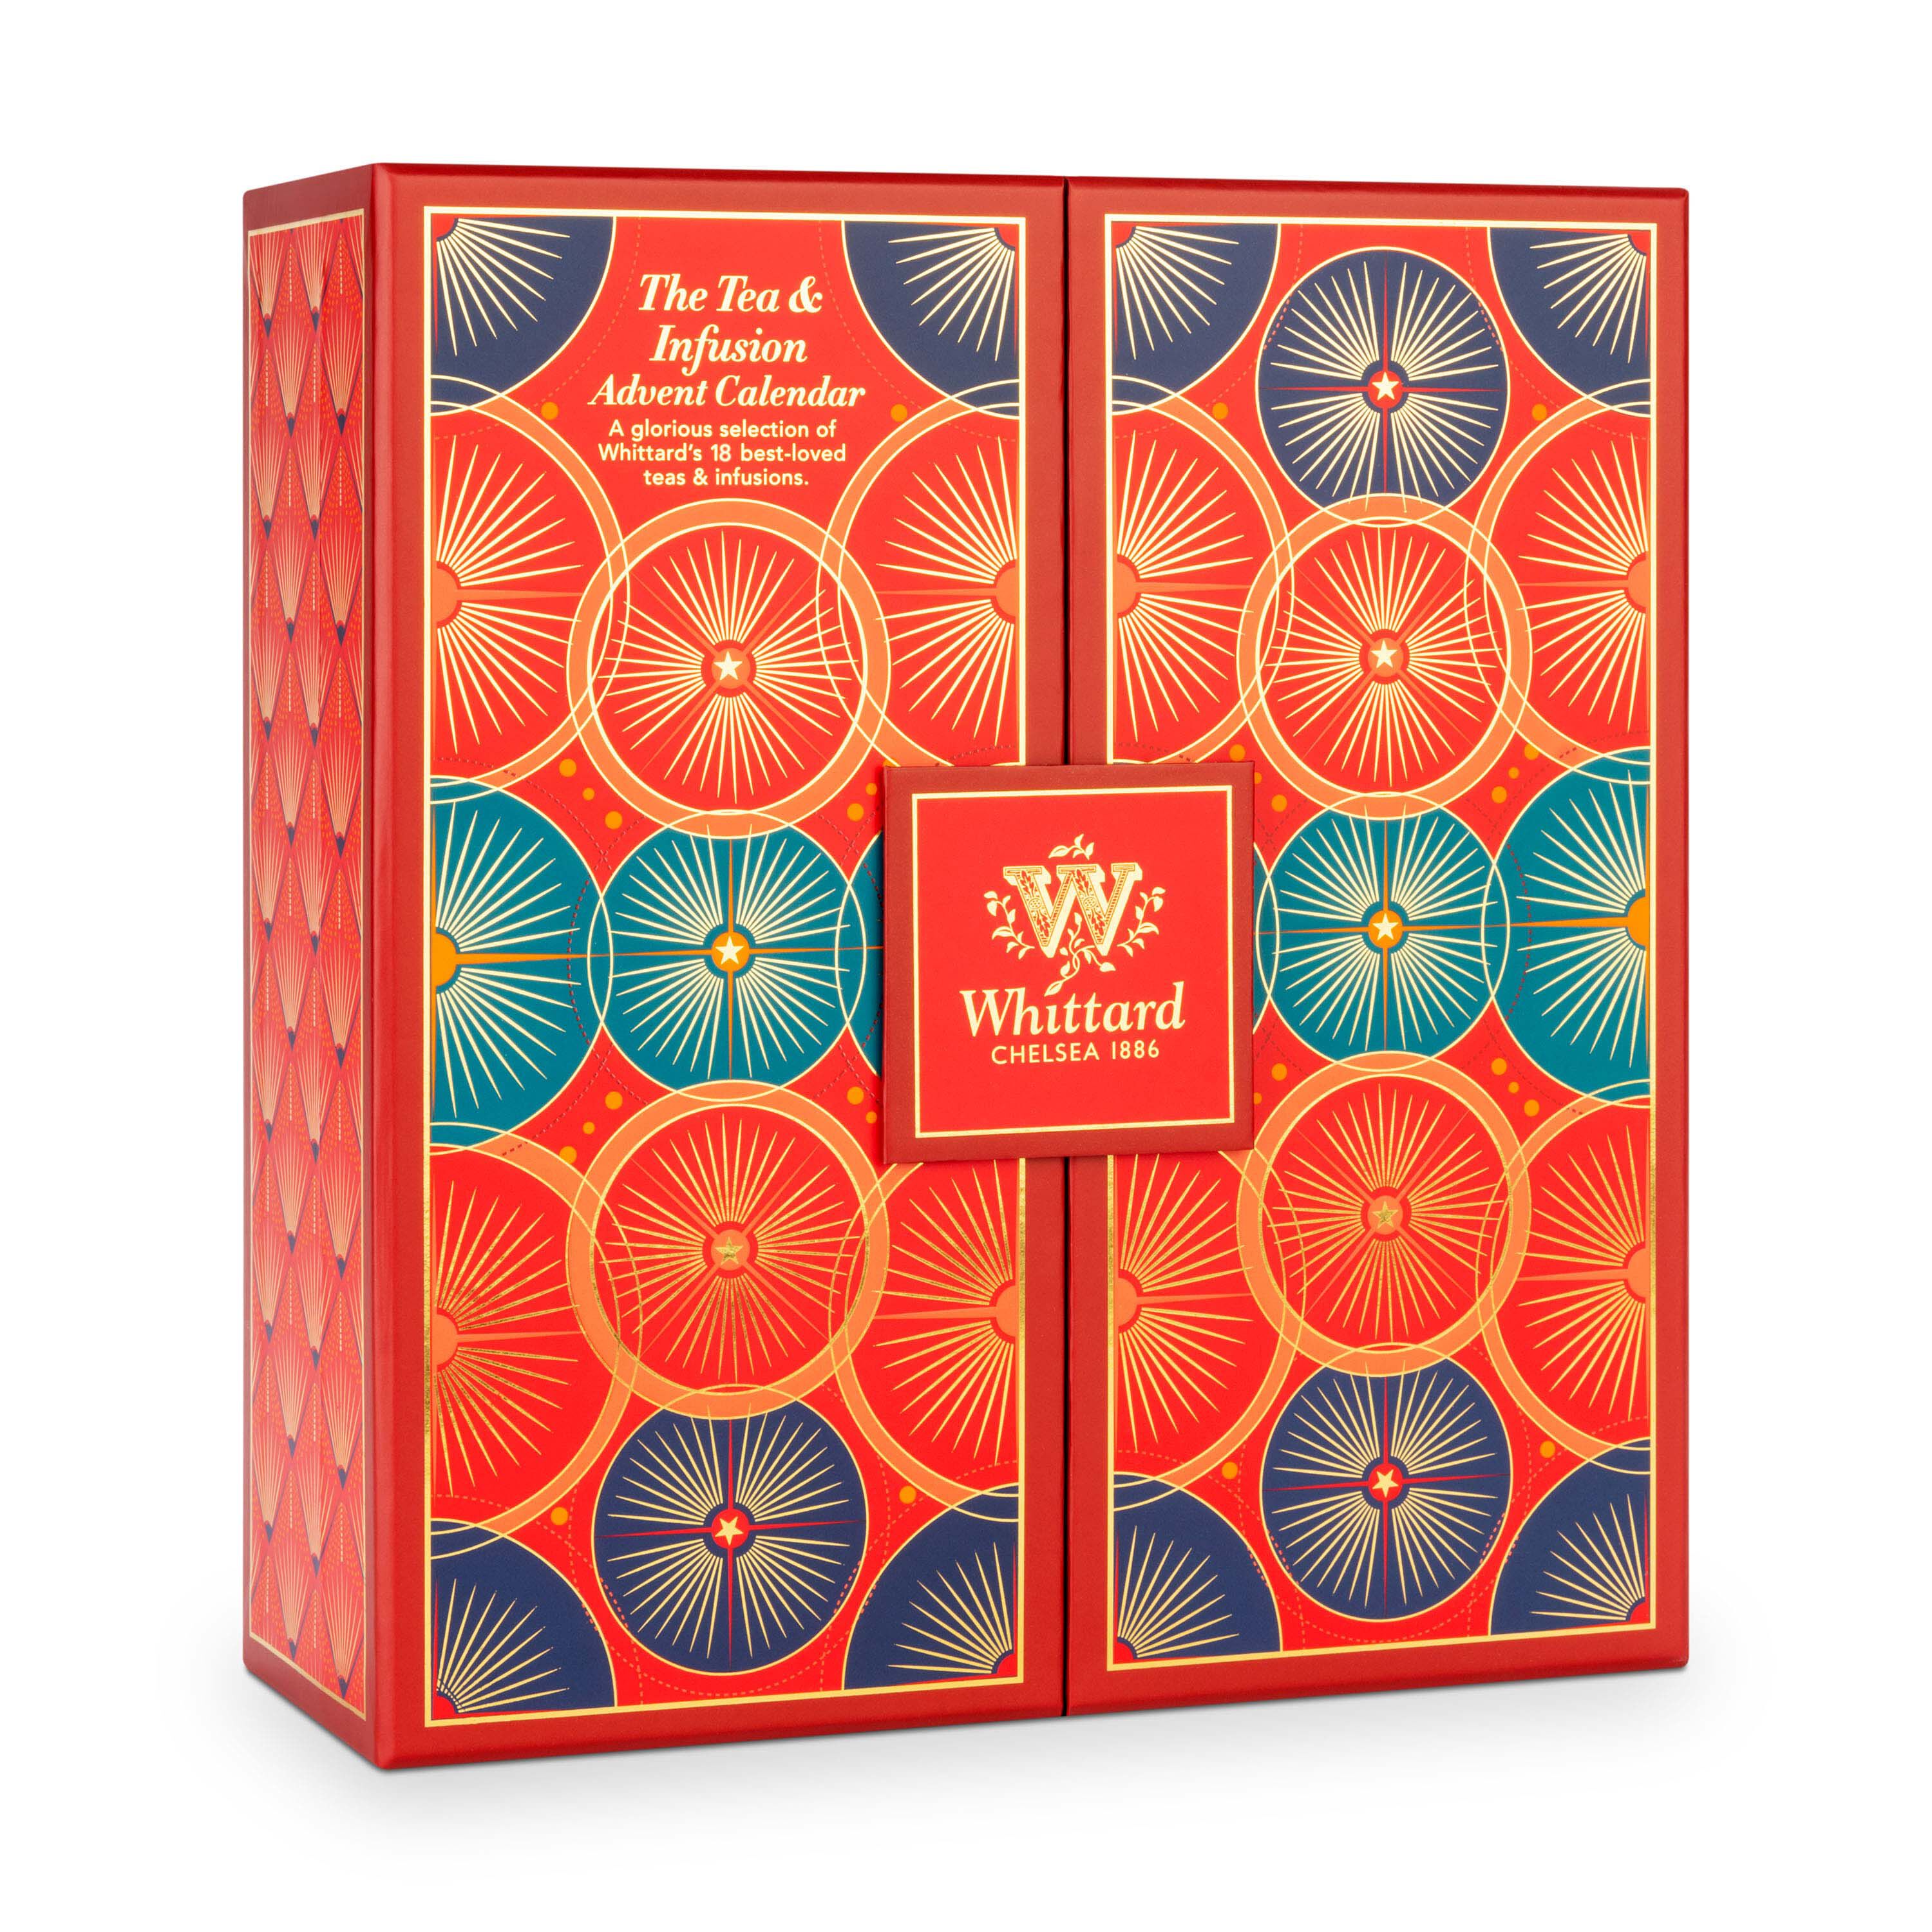 12 Best tea advent calendars you can buy for Christmas 2022